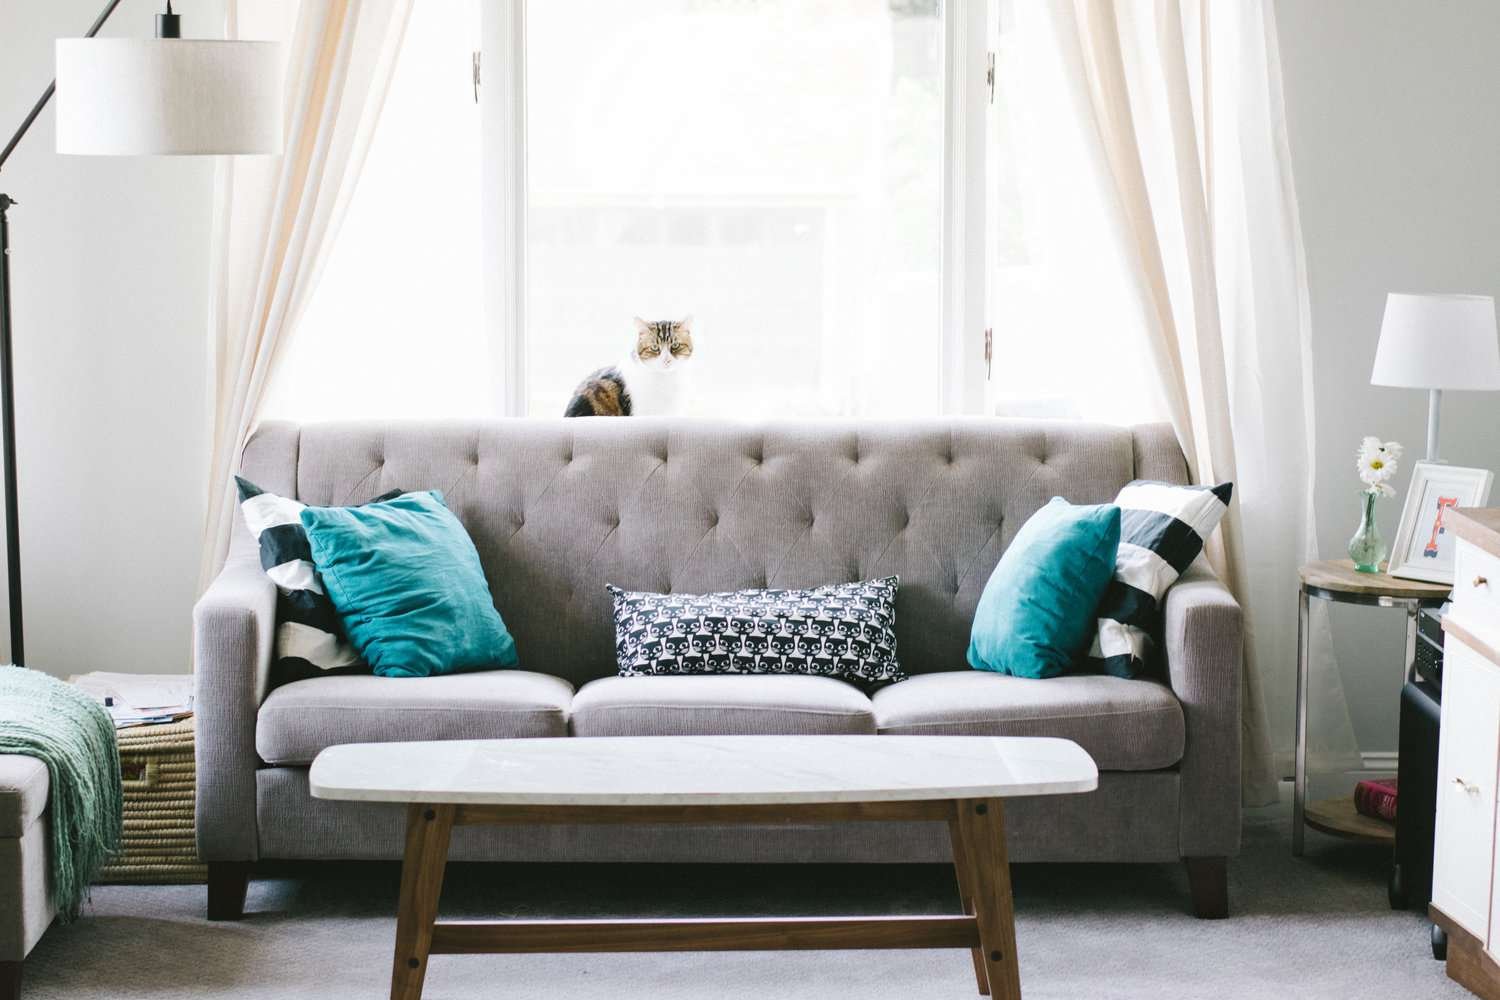 invest in a really nice couch to improve your home decorations and ideas